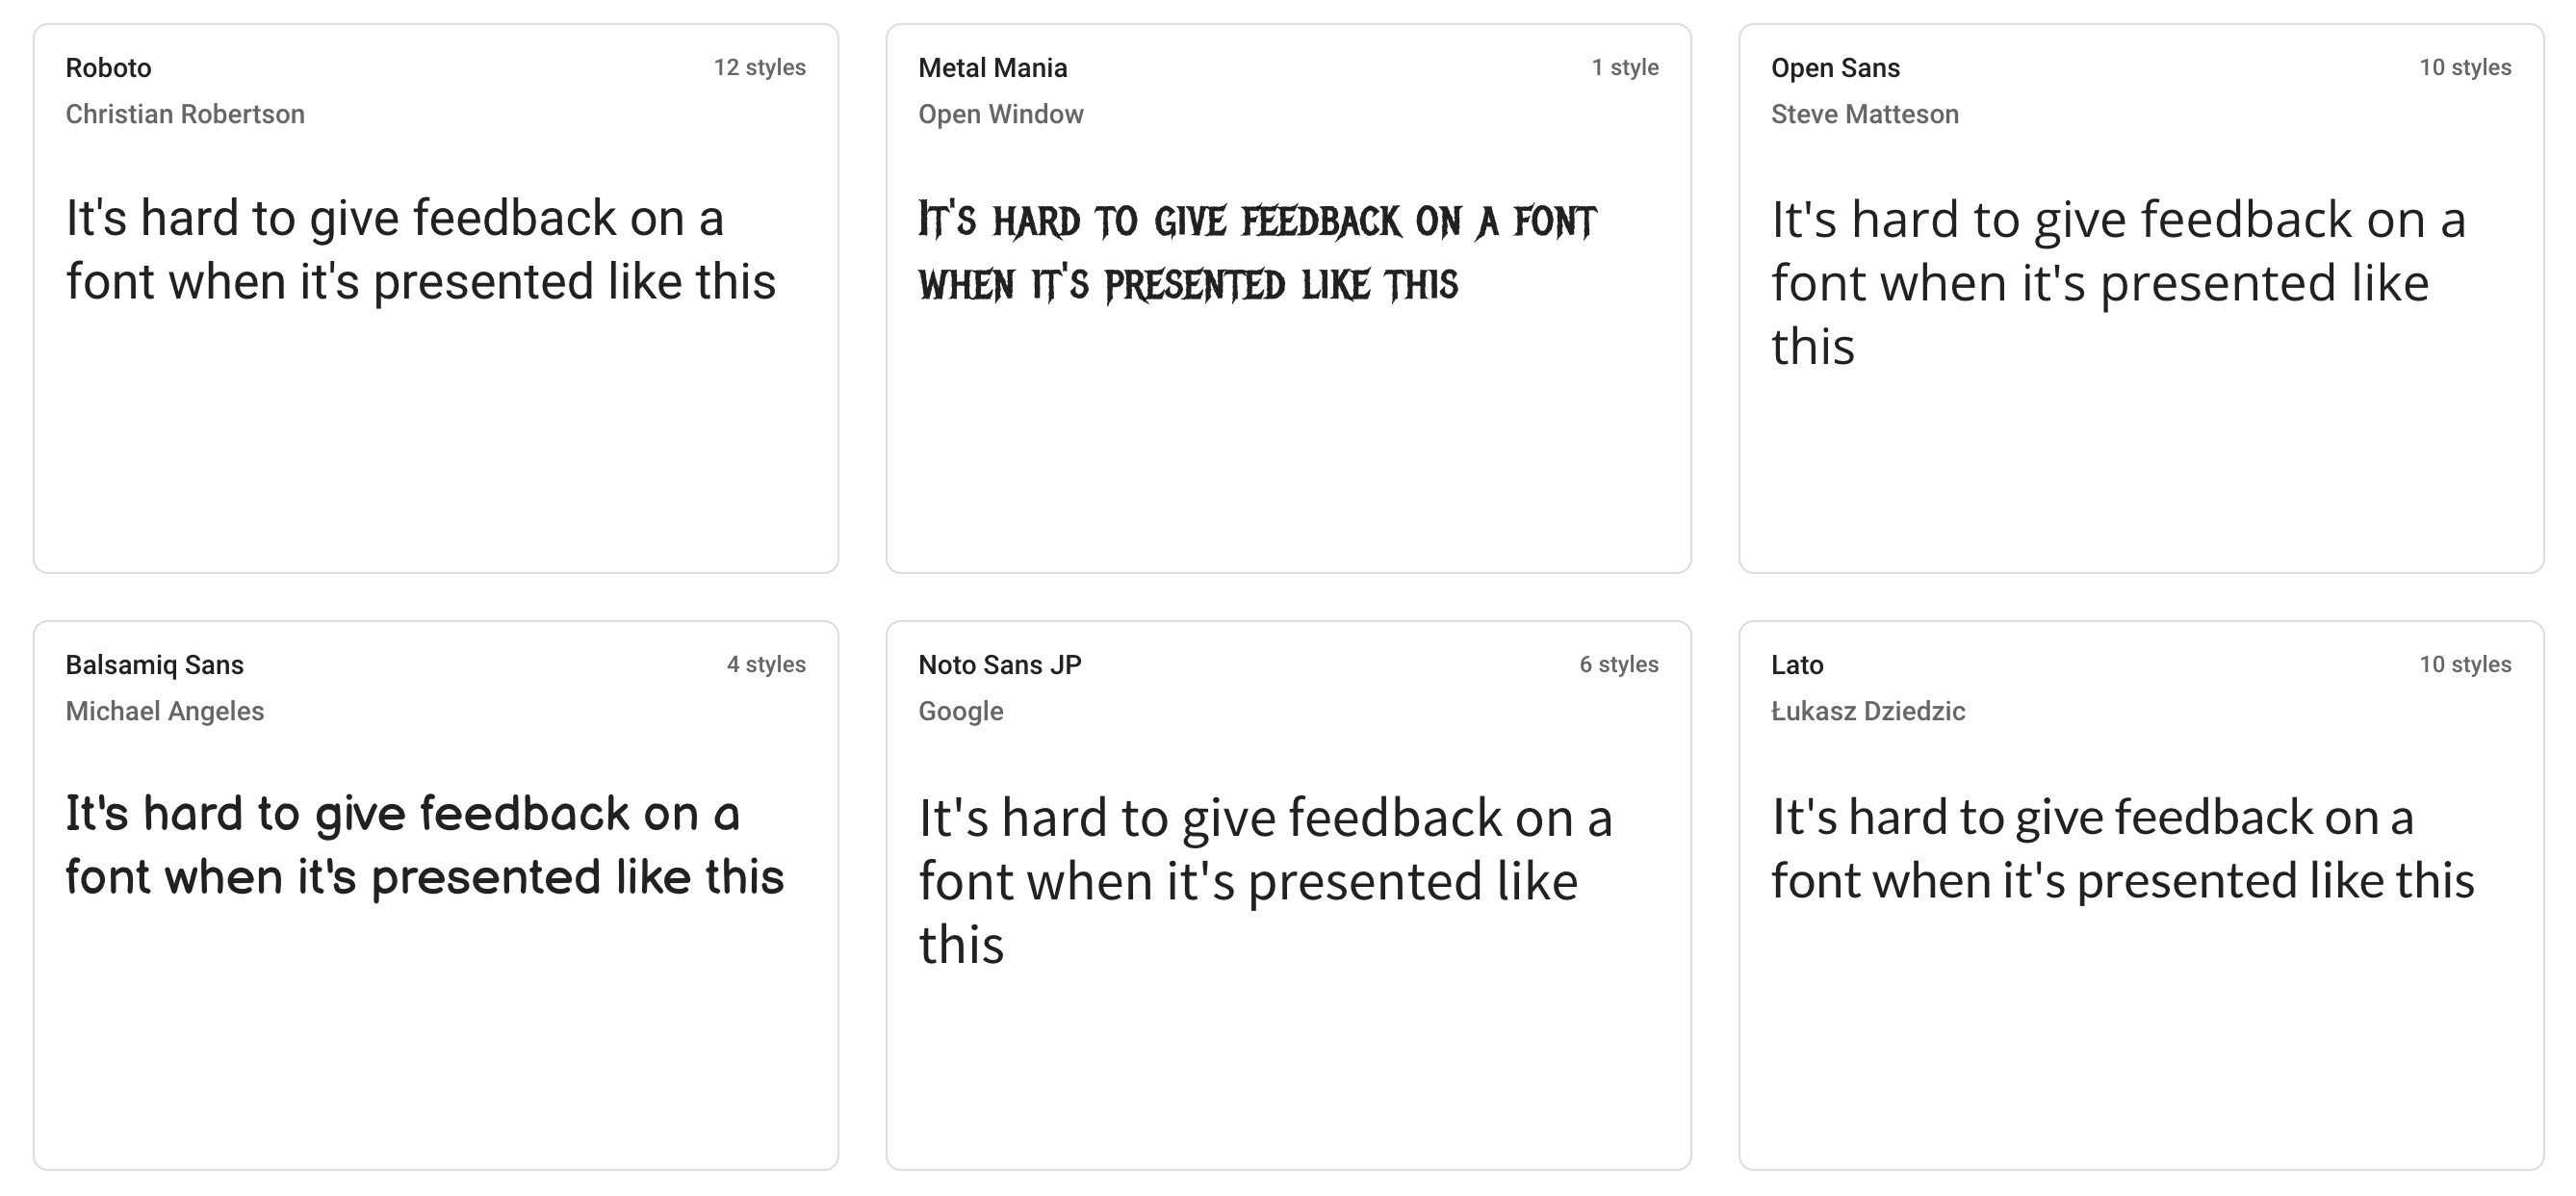 the phrase 'it's hard to give feedback on a font when it's presented like this' is shown in 6 different google fonts